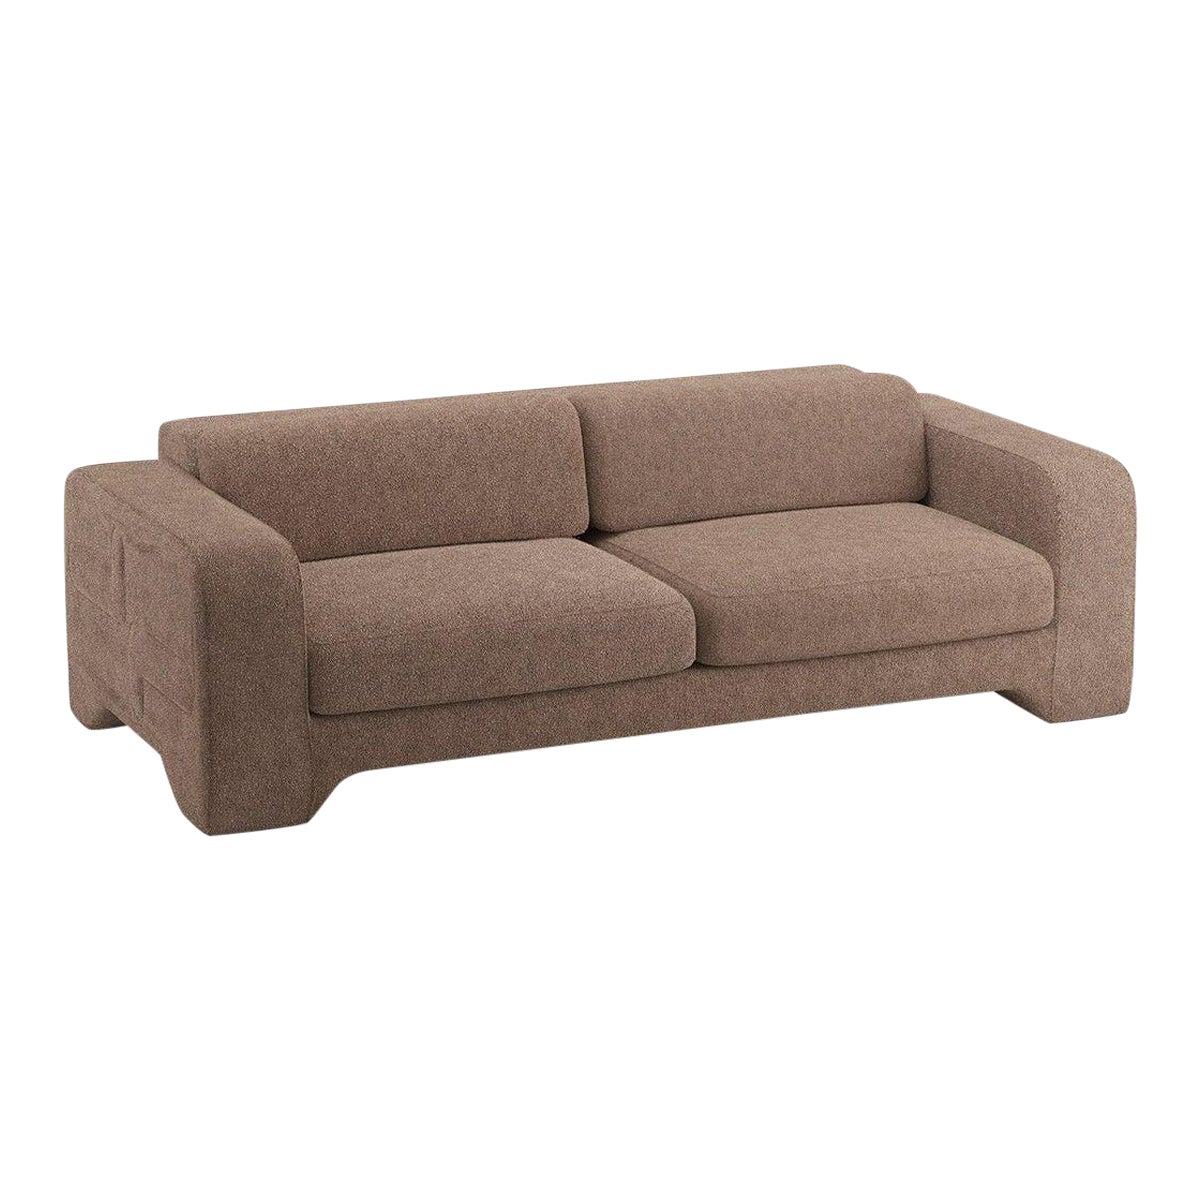 Popus Editions Giovanna 4 Seater Sofa in Brown Malmoe Terry Upholstery